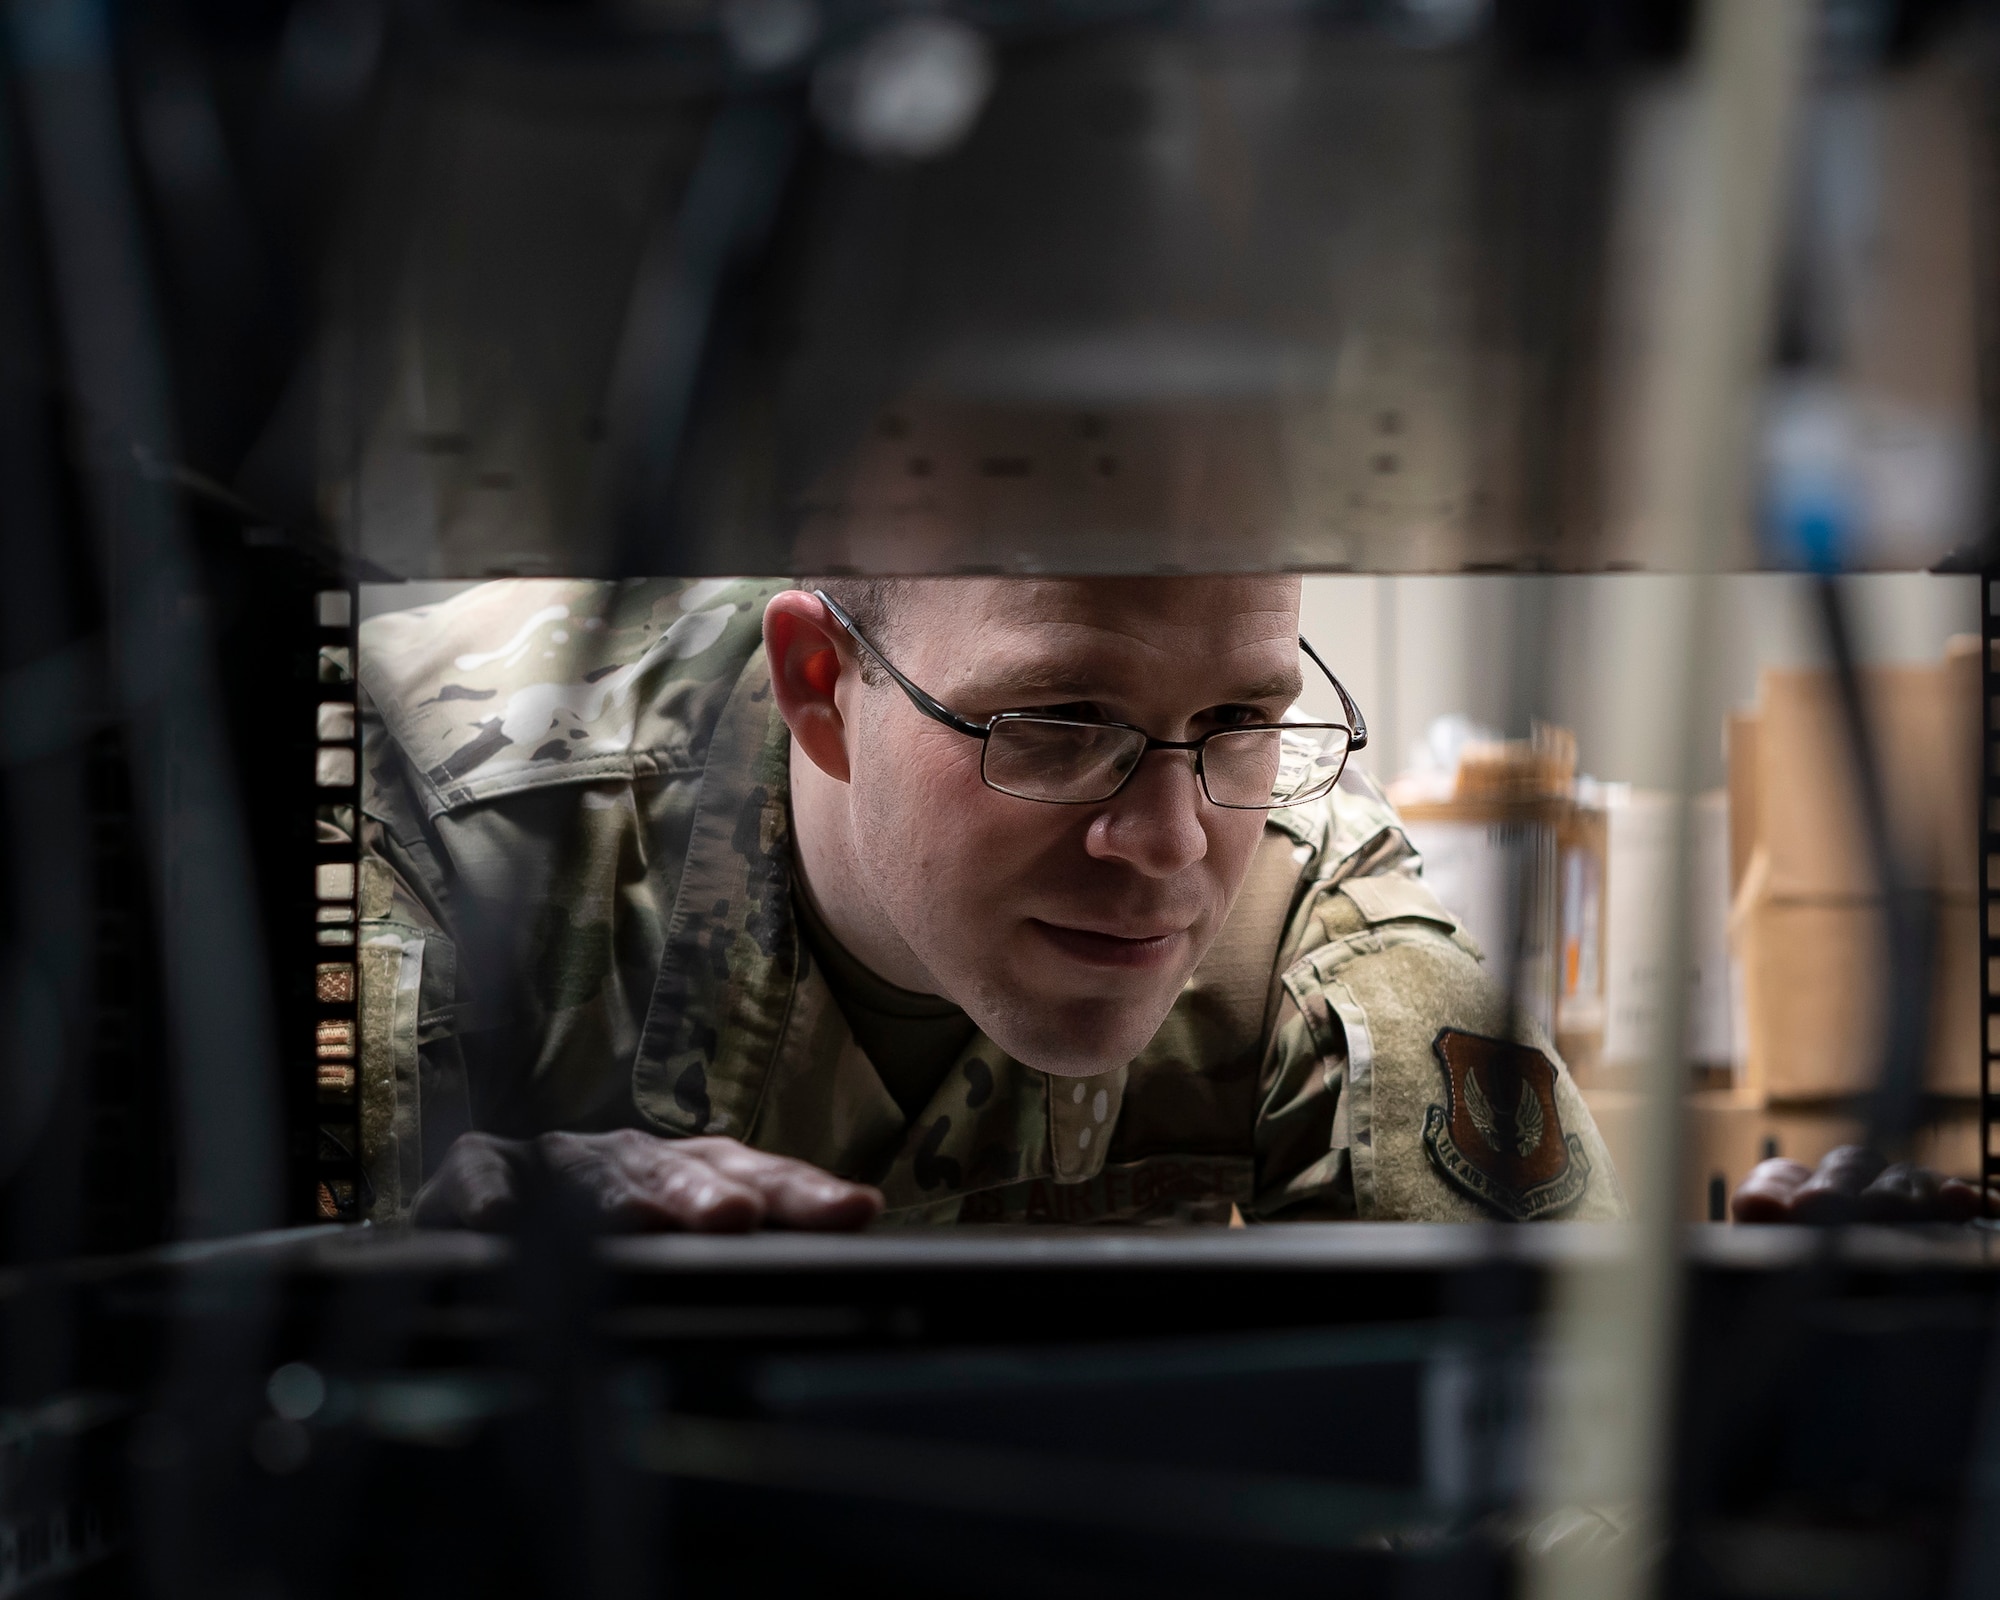 U.S. Air Force Staff Sgt. Edward Champa, 48th Communications Squadron cyber secure supervisor, works on a server at Royal Air Force Lakenheath, England, May 25, 2021. The 48th CS won the Lt. Gen. Harold W. Grant Award for best small communications squadron in the U.S. Air Force for the Oct. 1, 2019 to Sept. 30, 2020 time period. (U.S. Air Force photo by Senior Airman Jessi Monte)